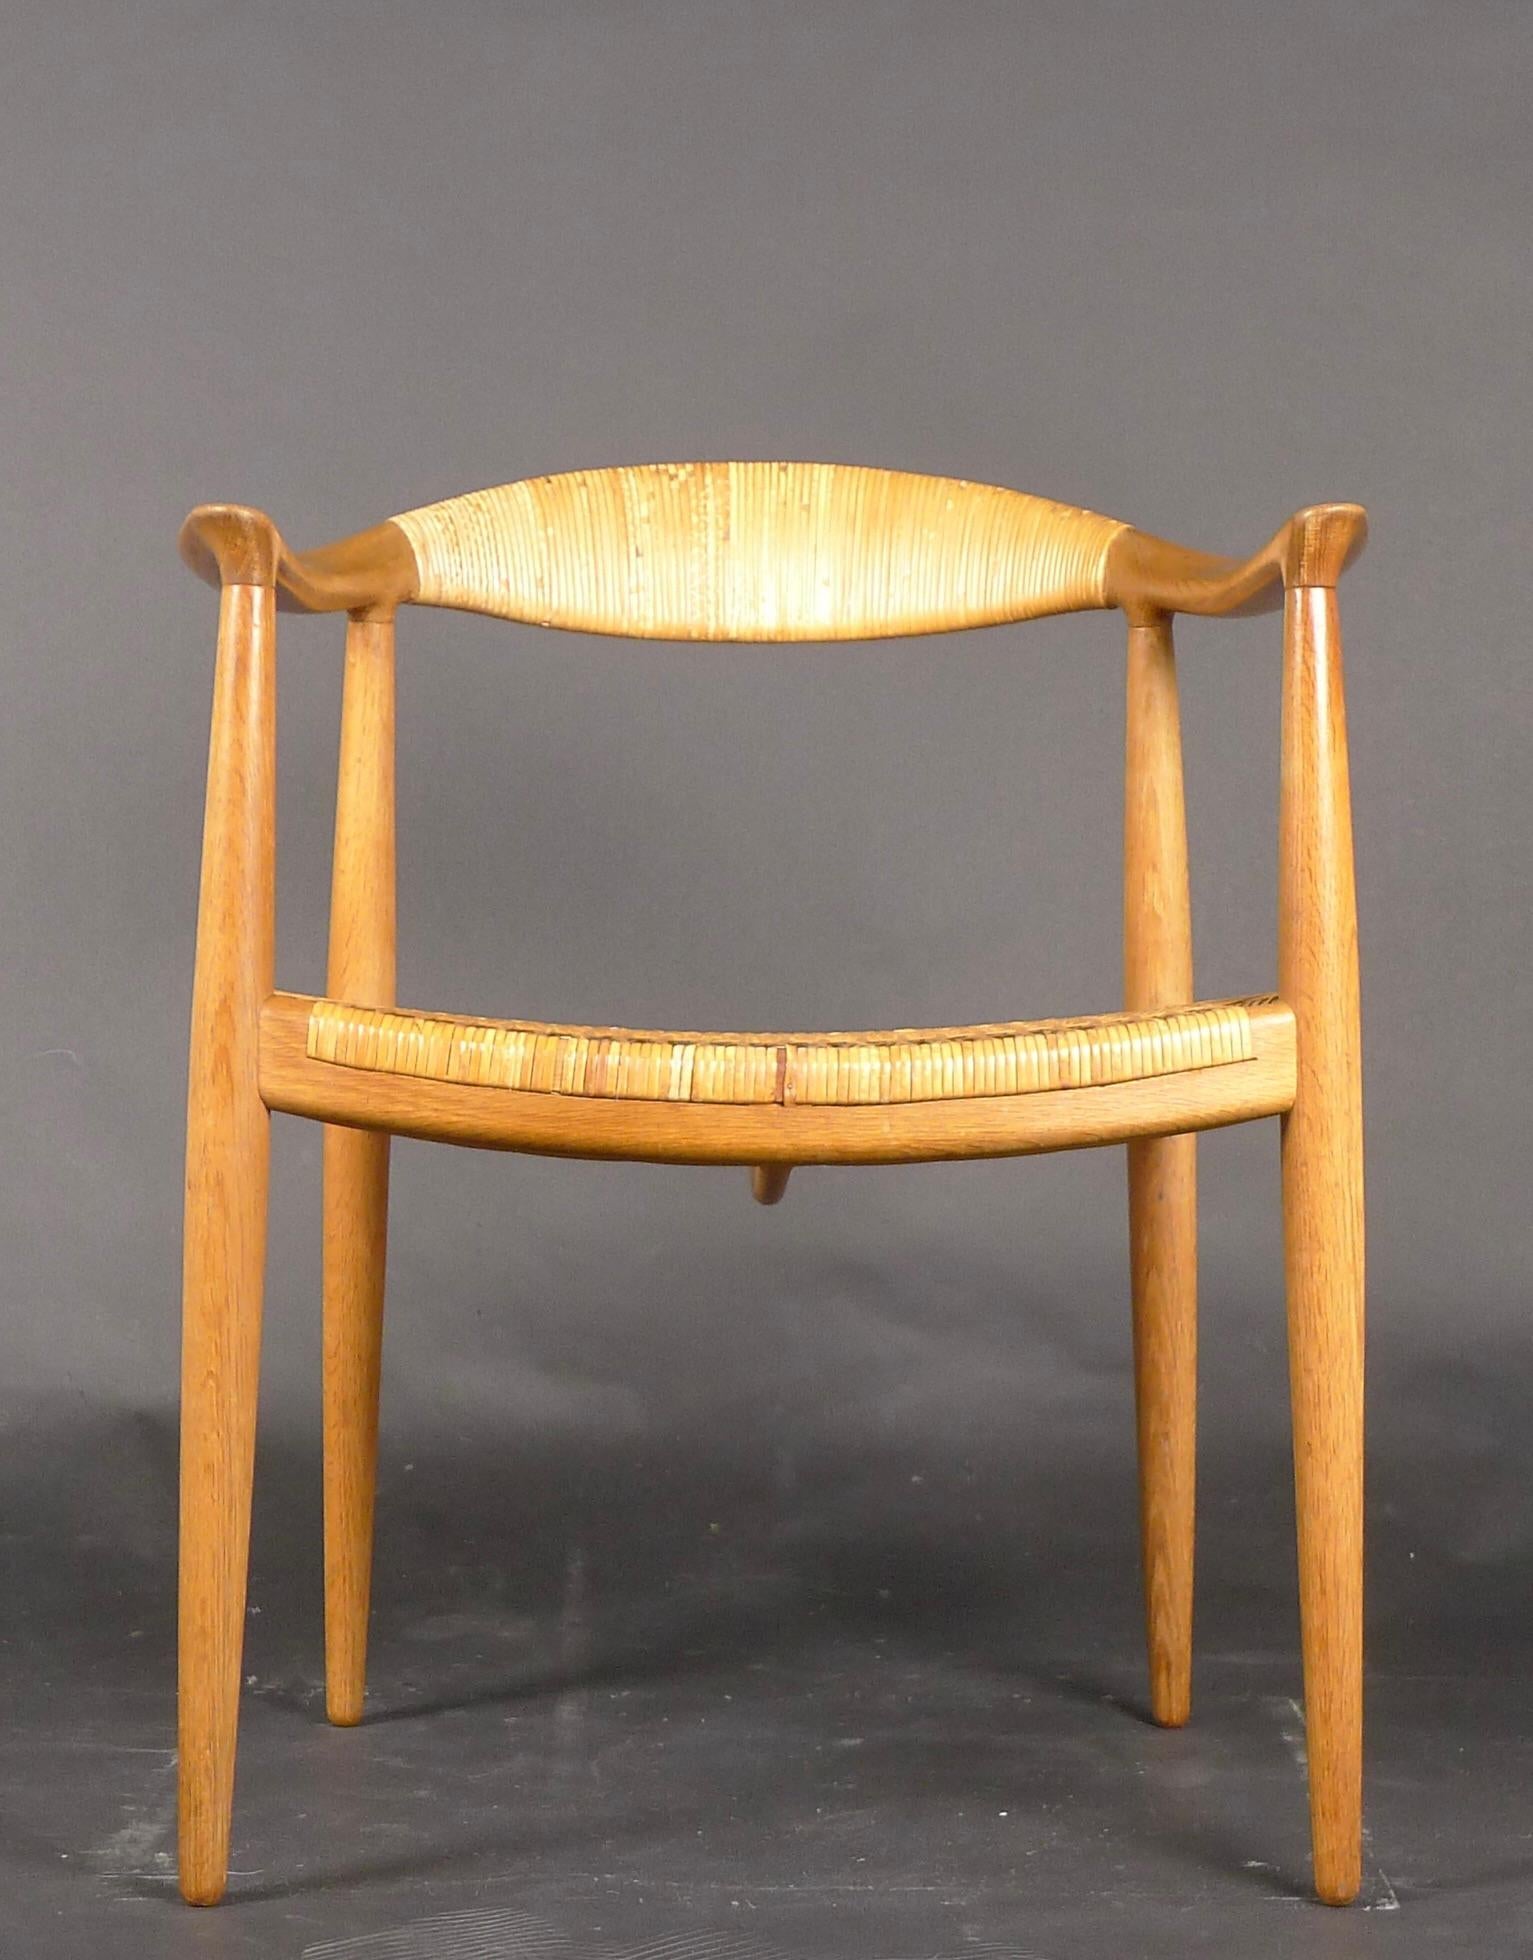 Known as The Round Chair, or simply The Chair, Hans J Wegner created the design for Johannes Hansen to display at the annual exhibition of the Copenhagen Cabinetmakers' Guild in 1949.  The early examples had a mortise and tenon joint connecting the